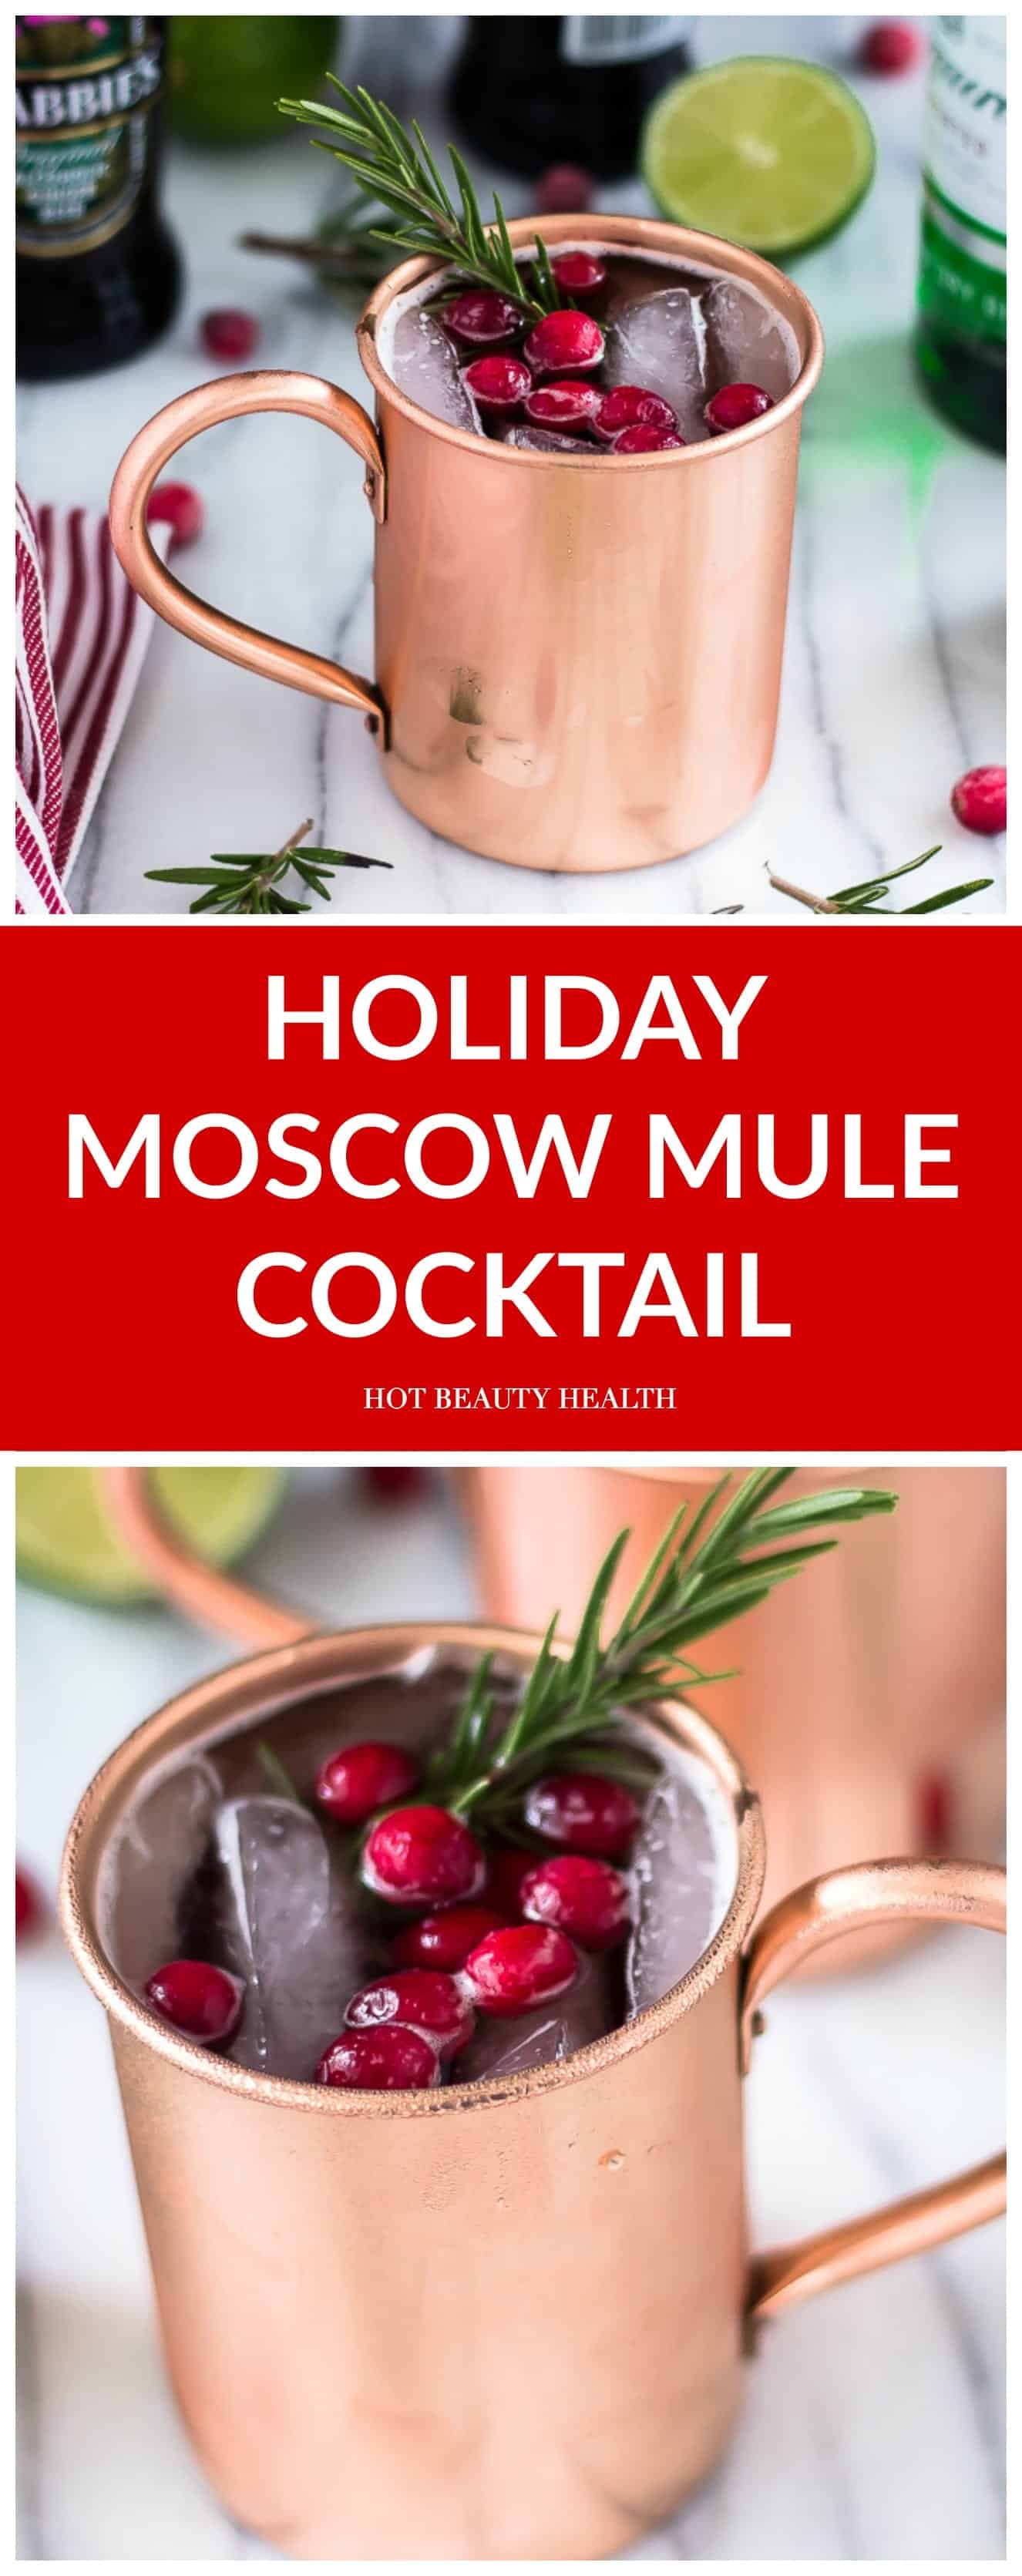 Get in the Seasonal Spirit With This Holiday Spin on the Moscow Mule drink cocktail. Made with cranberries, ginger beer, and vodka (Click here for recipe!)